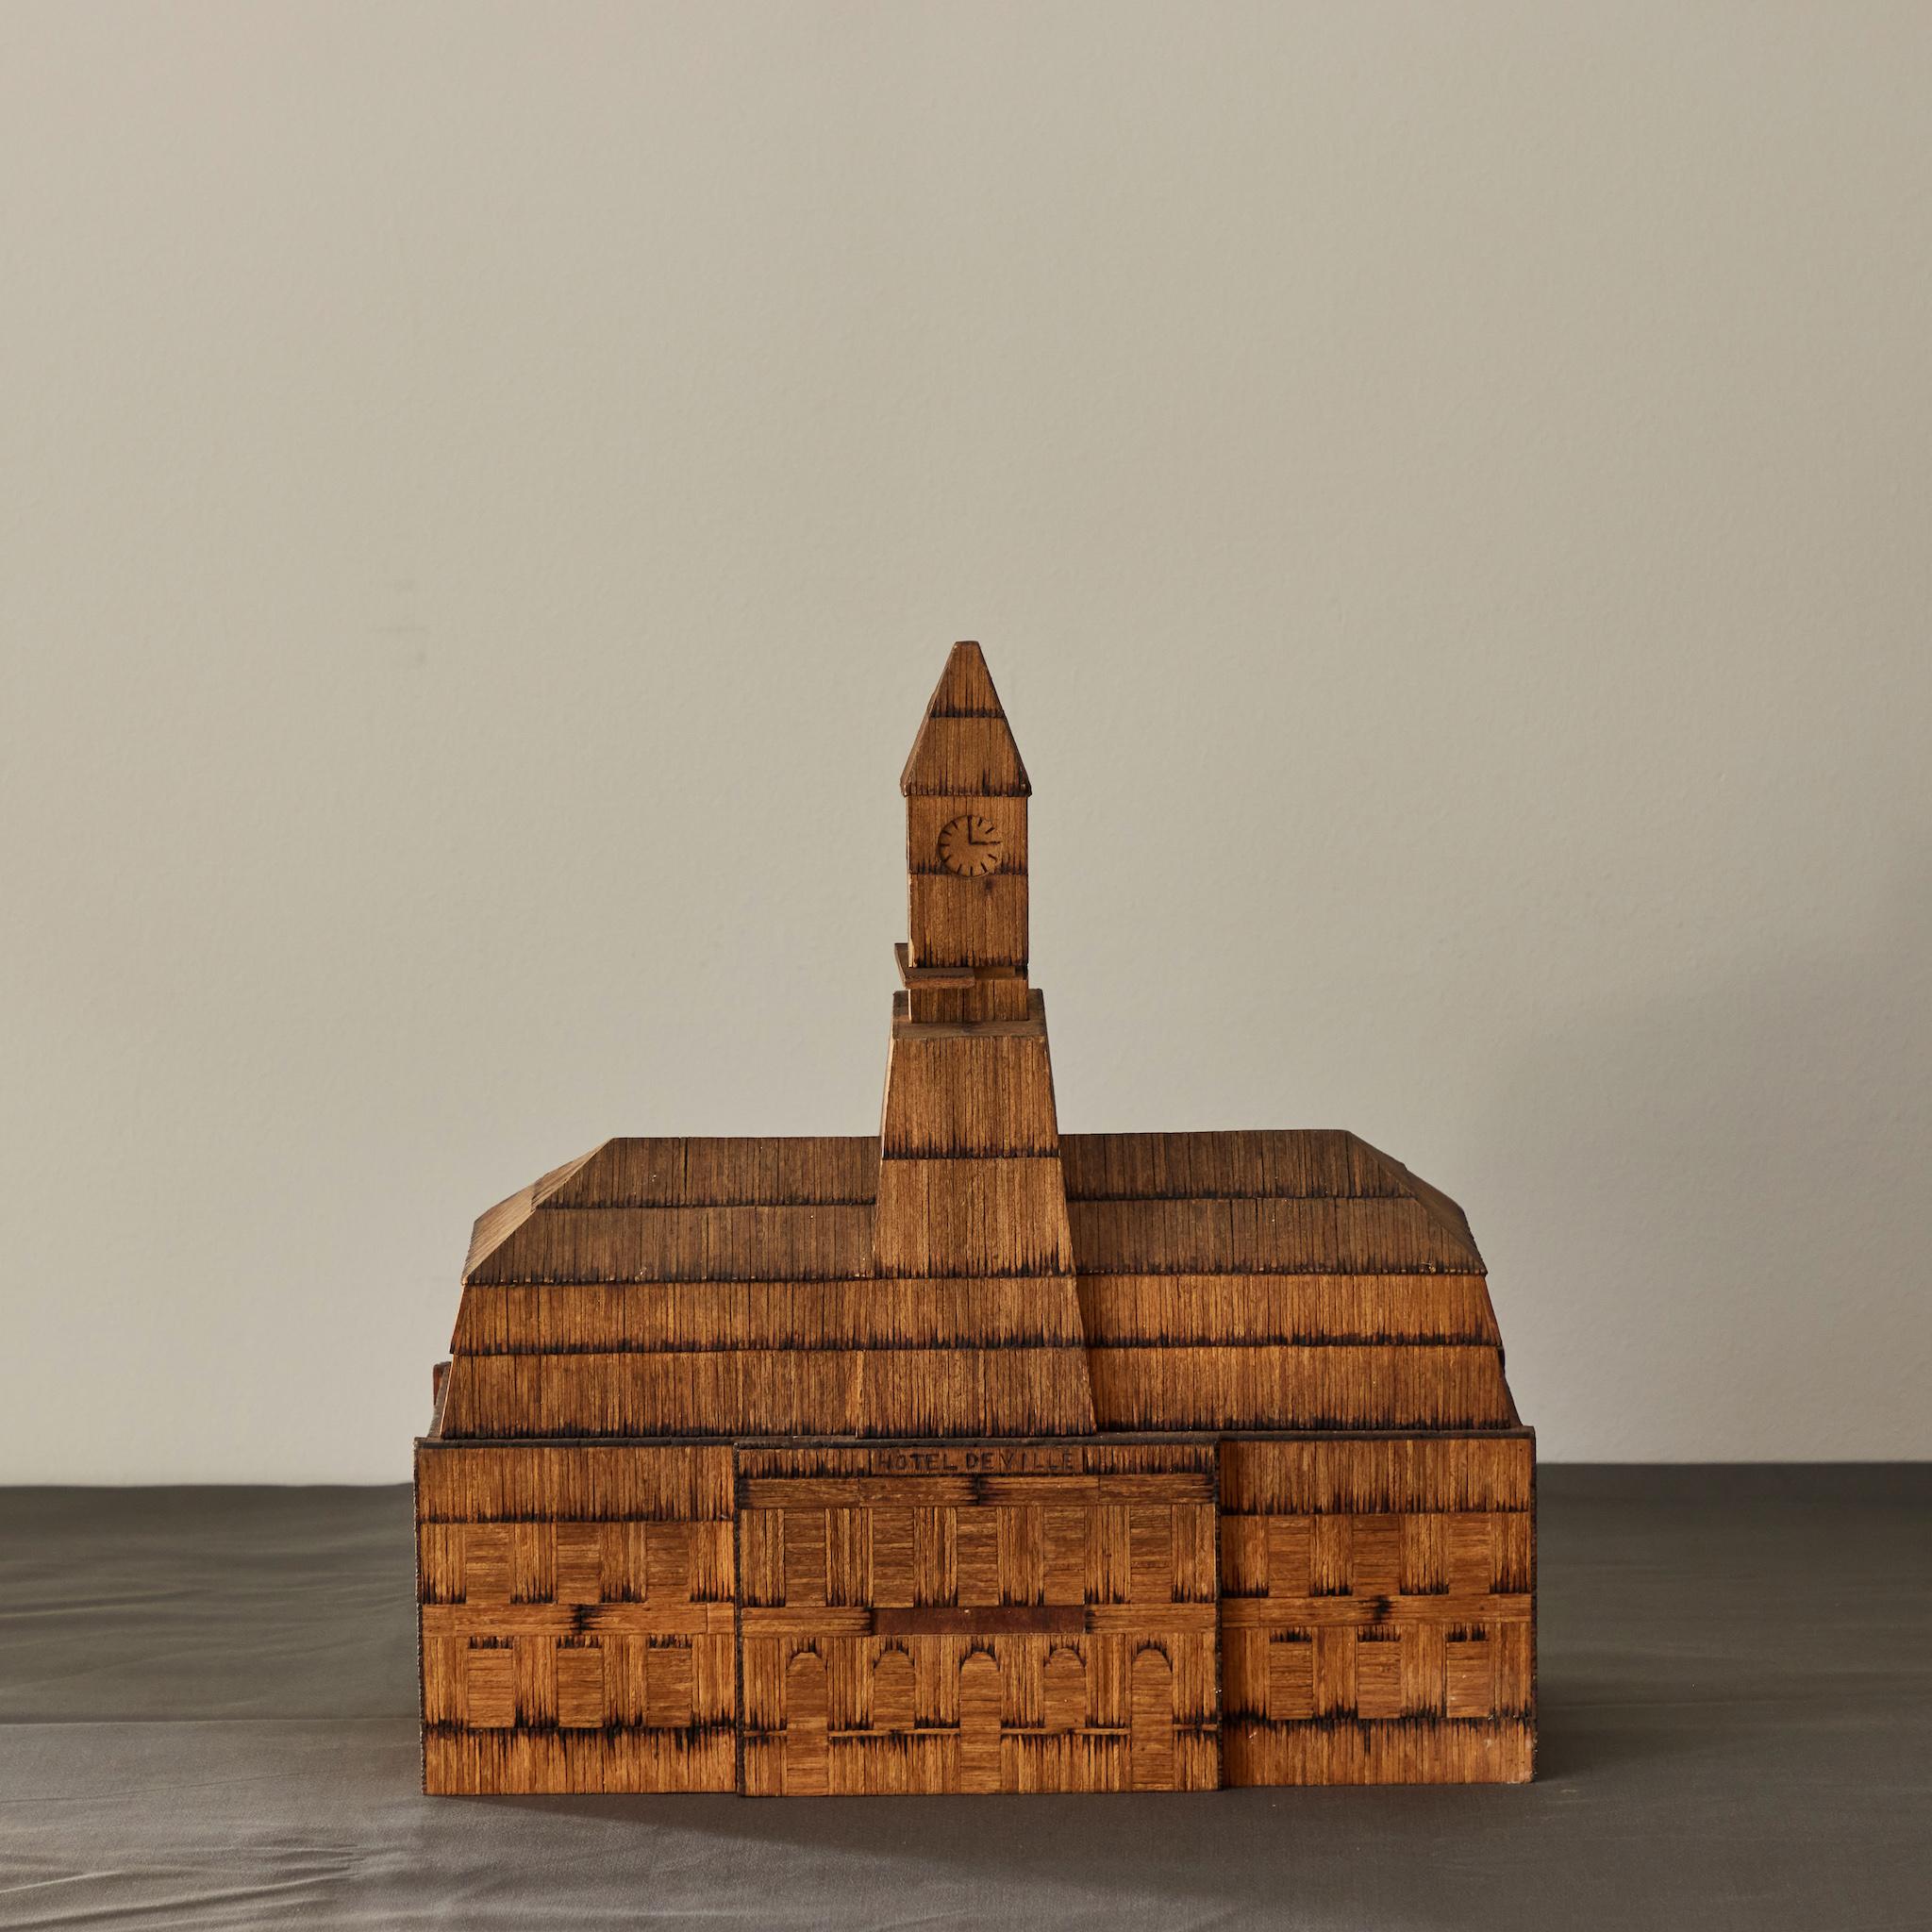 Set of two French handcrafted matchwork models of buildings. An exemplary work of folk art, the attention to detail is exquisite, the wood aged to a beautiful, rich honey color. The first model is of the 